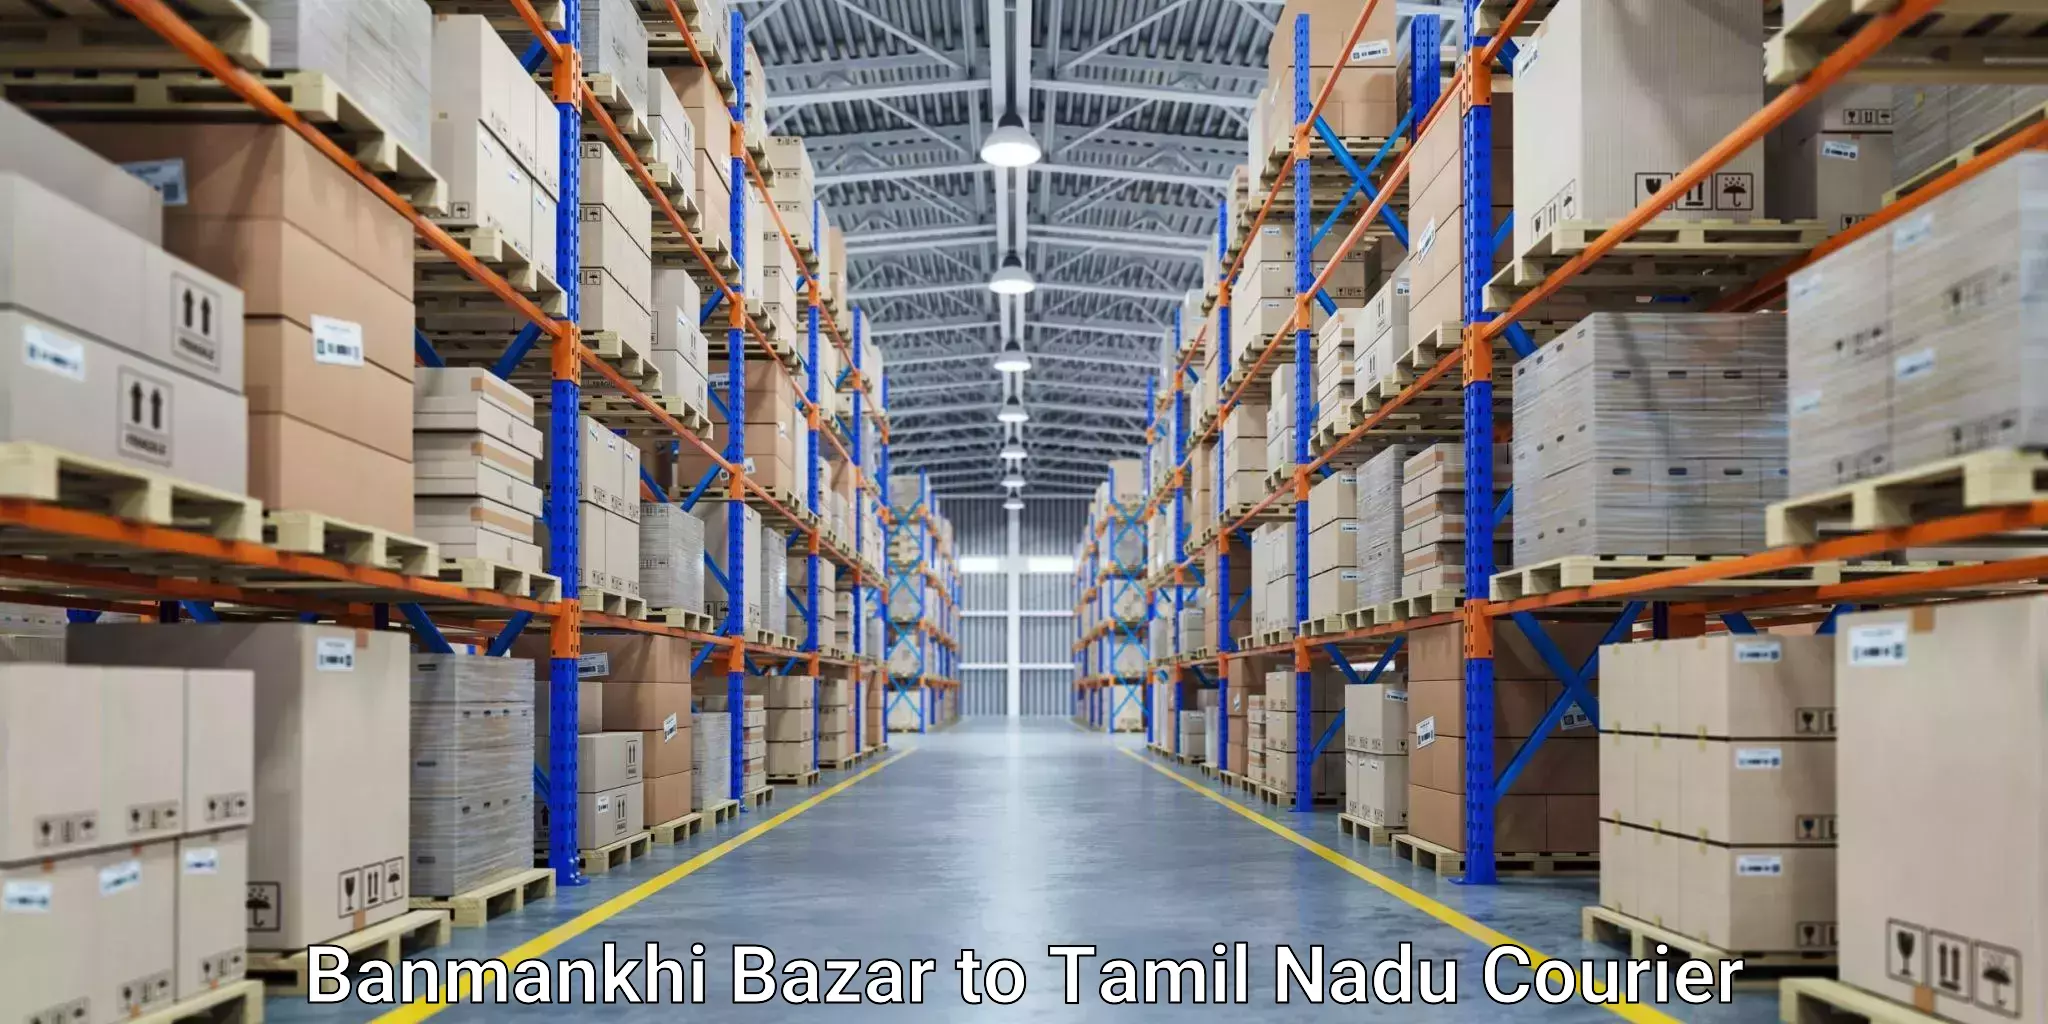 Express courier facilities Banmankhi Bazar to Tamil Nadu Agricultural University Coimbatore